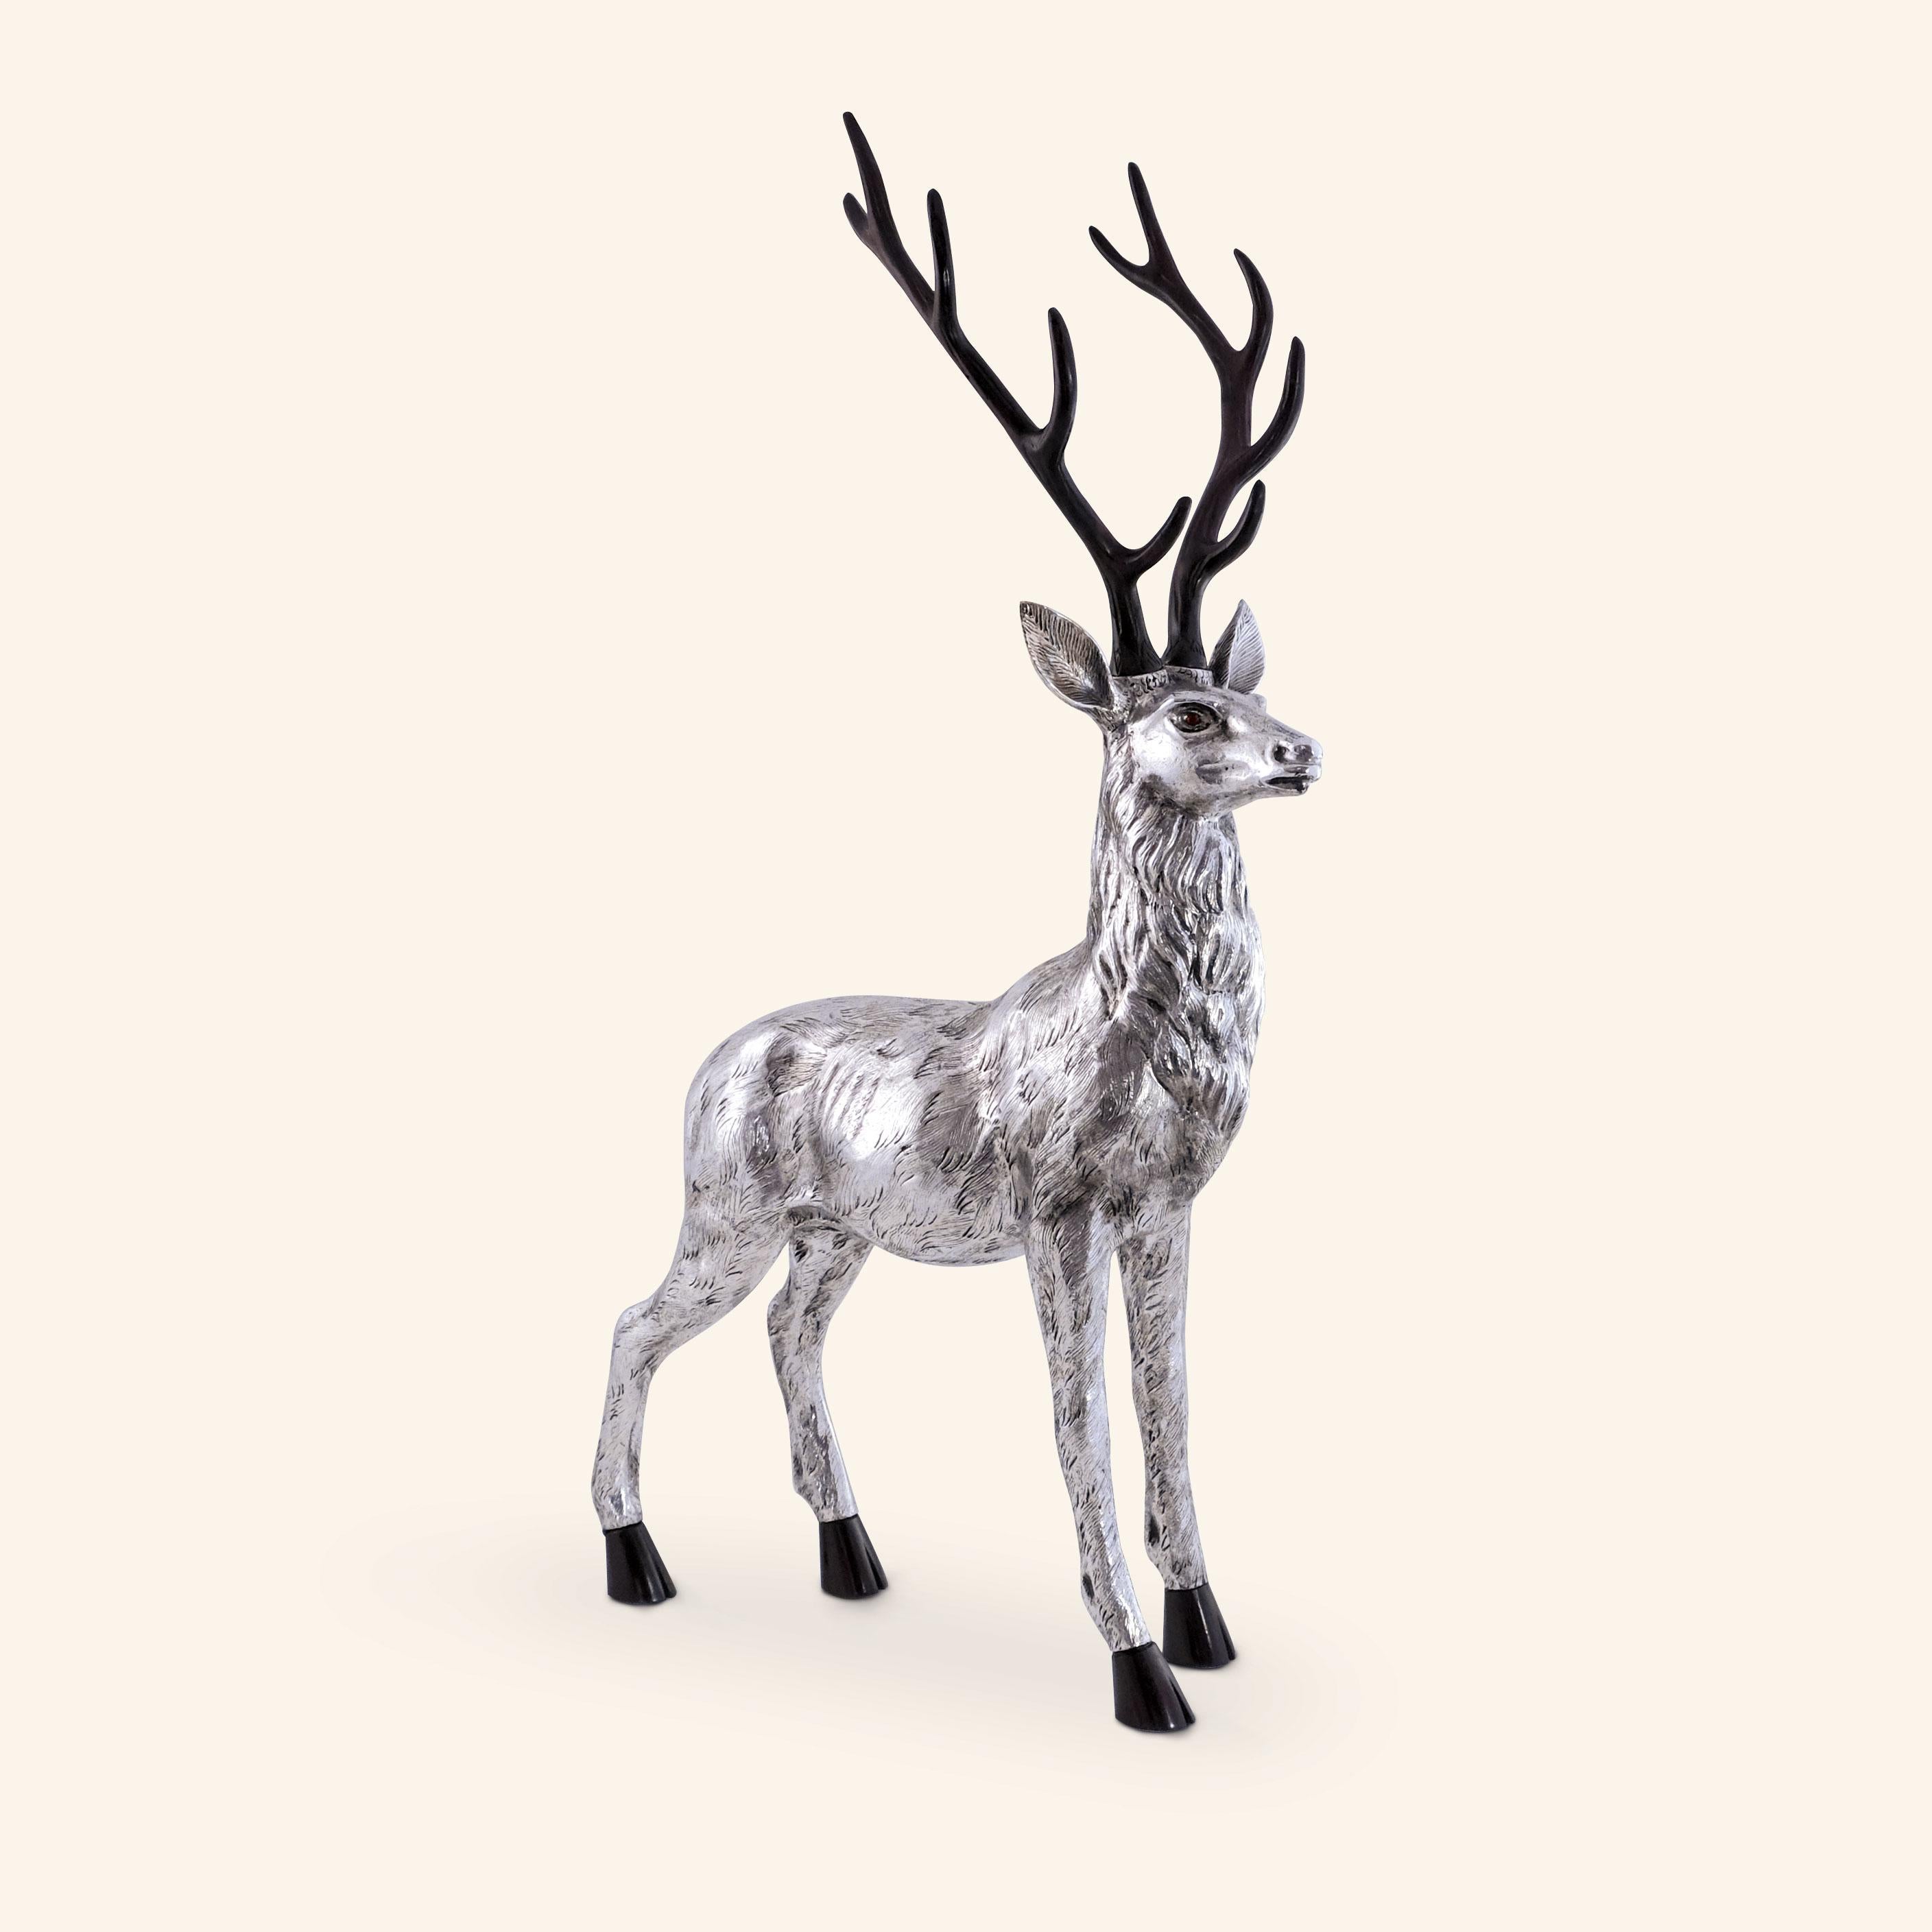 Deer by Alcino Silversmith 1902 is a handcrafted piece in 925 sterling silver with Jacaranda wood application in the antlers and feets.
The piece is totally handcrafted, hammered and chiseled by excellent craftsmen, giving this piece a much higher